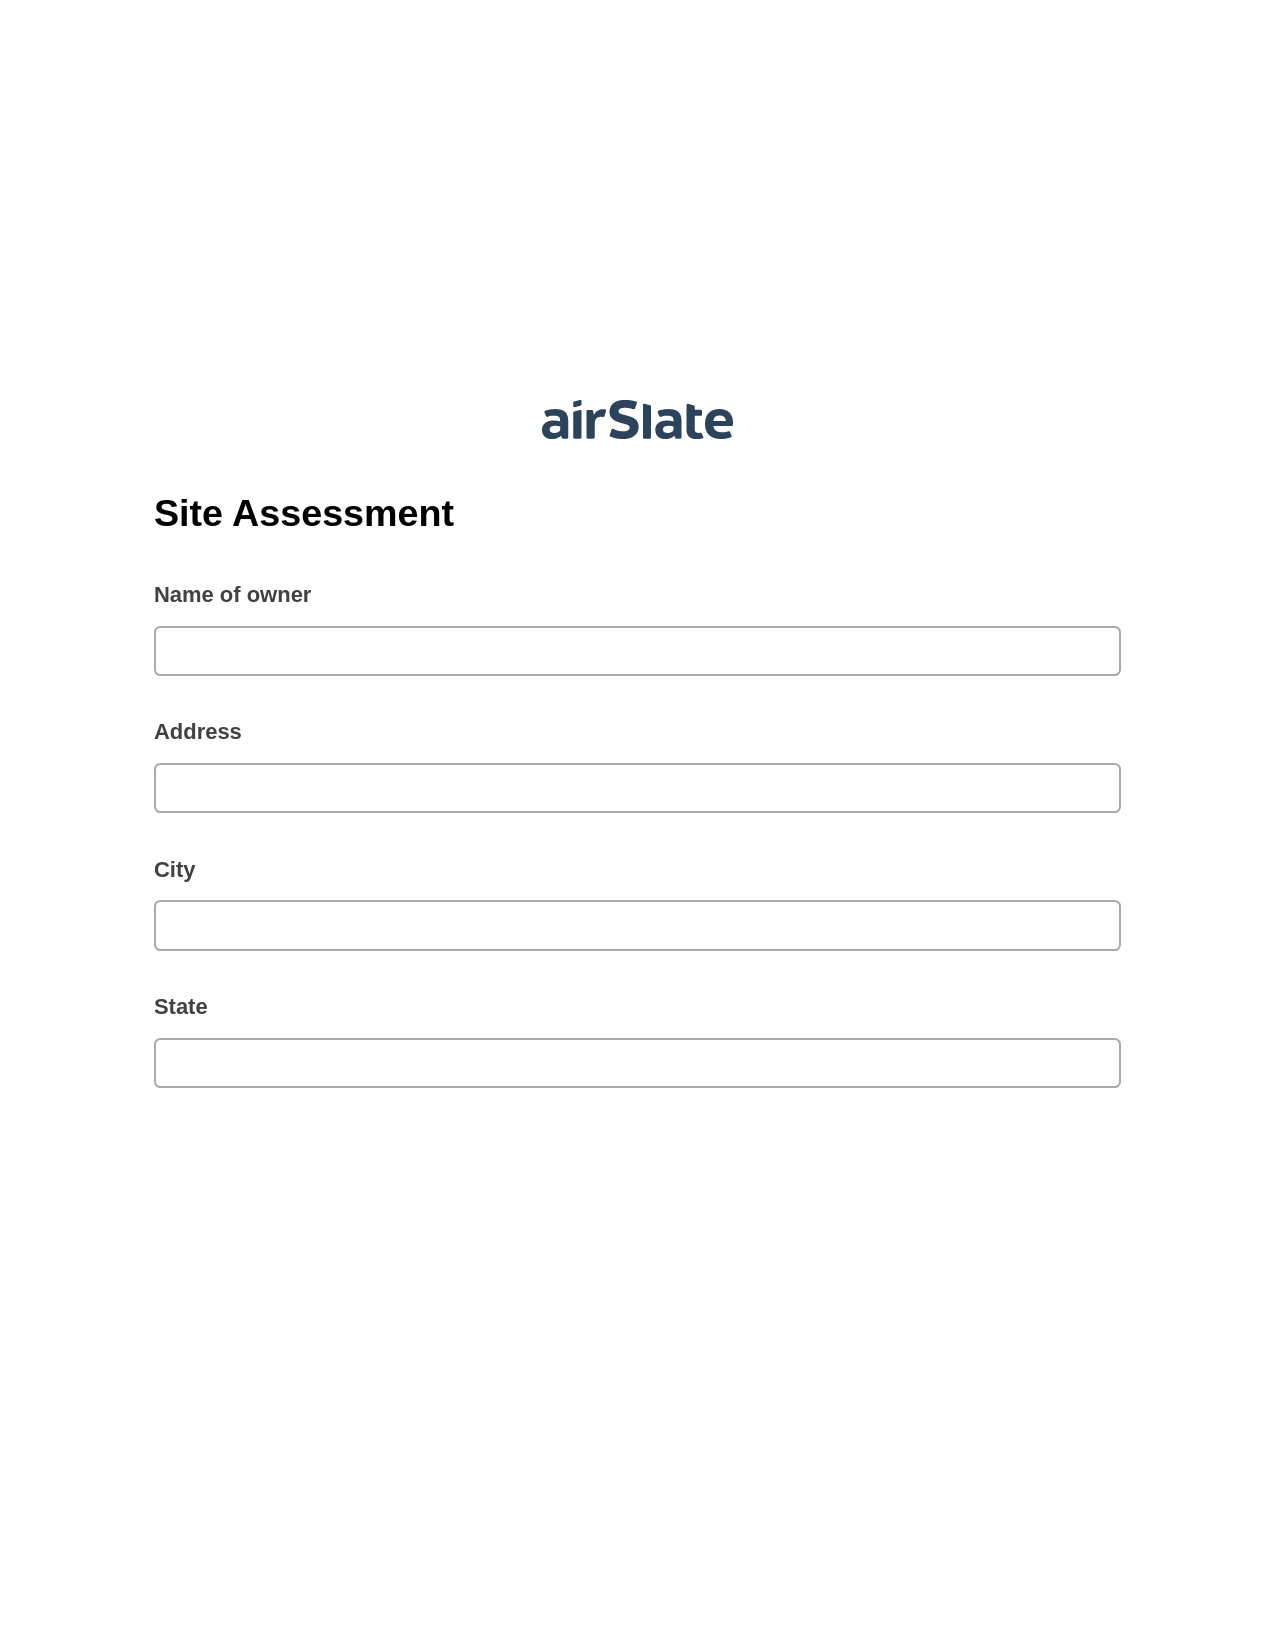 Site Assessment Pre-fill Slate from MS Dynamics 365 Records Bot, Google Cloud Print Bot, Archive to SharePoint Folder Bot